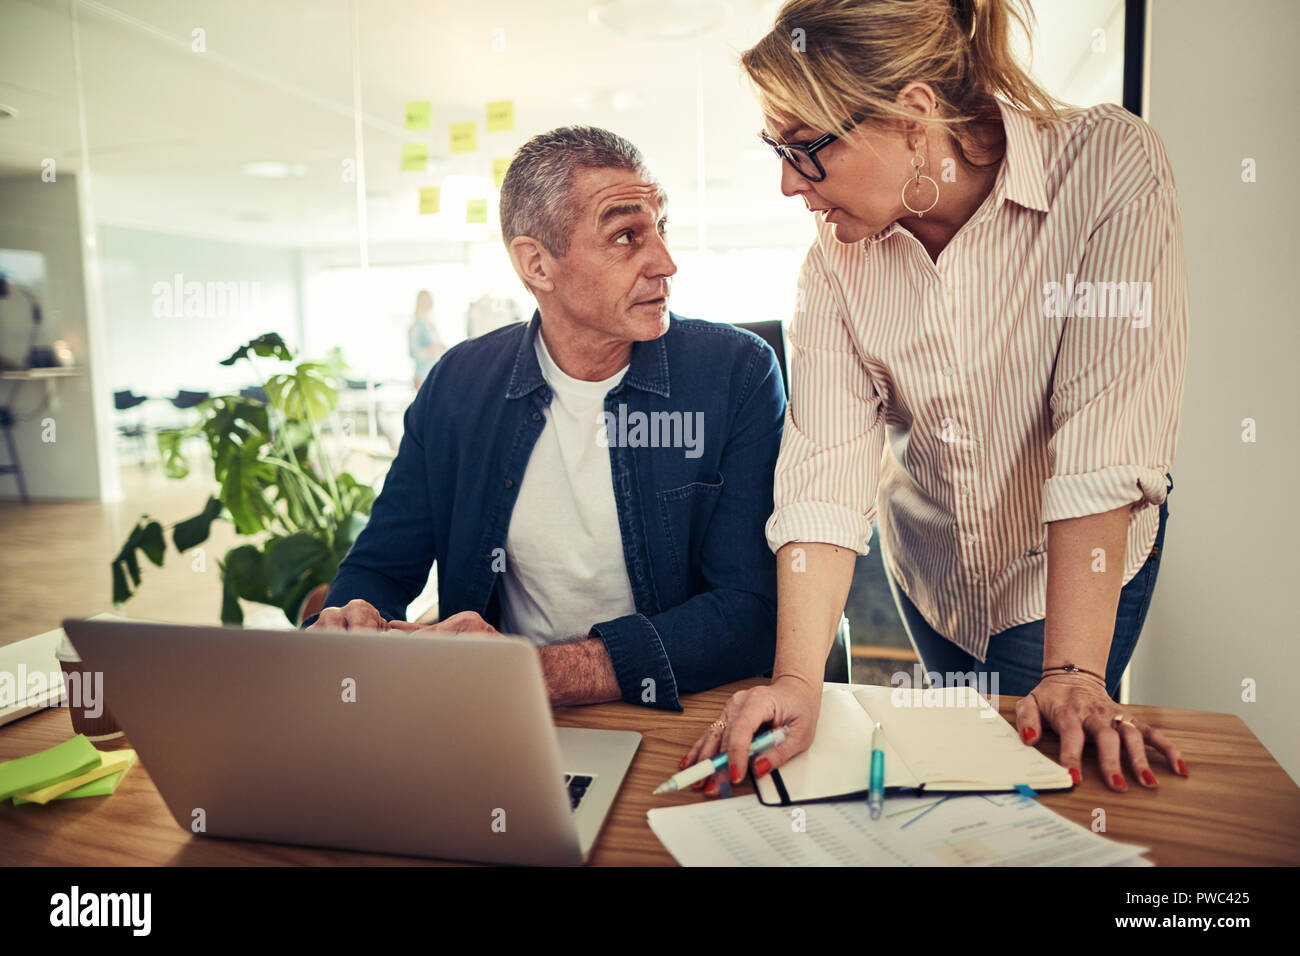 Two focused mature business colleagues discussing work together over a laptop at a desk in a modern office Stock Photo